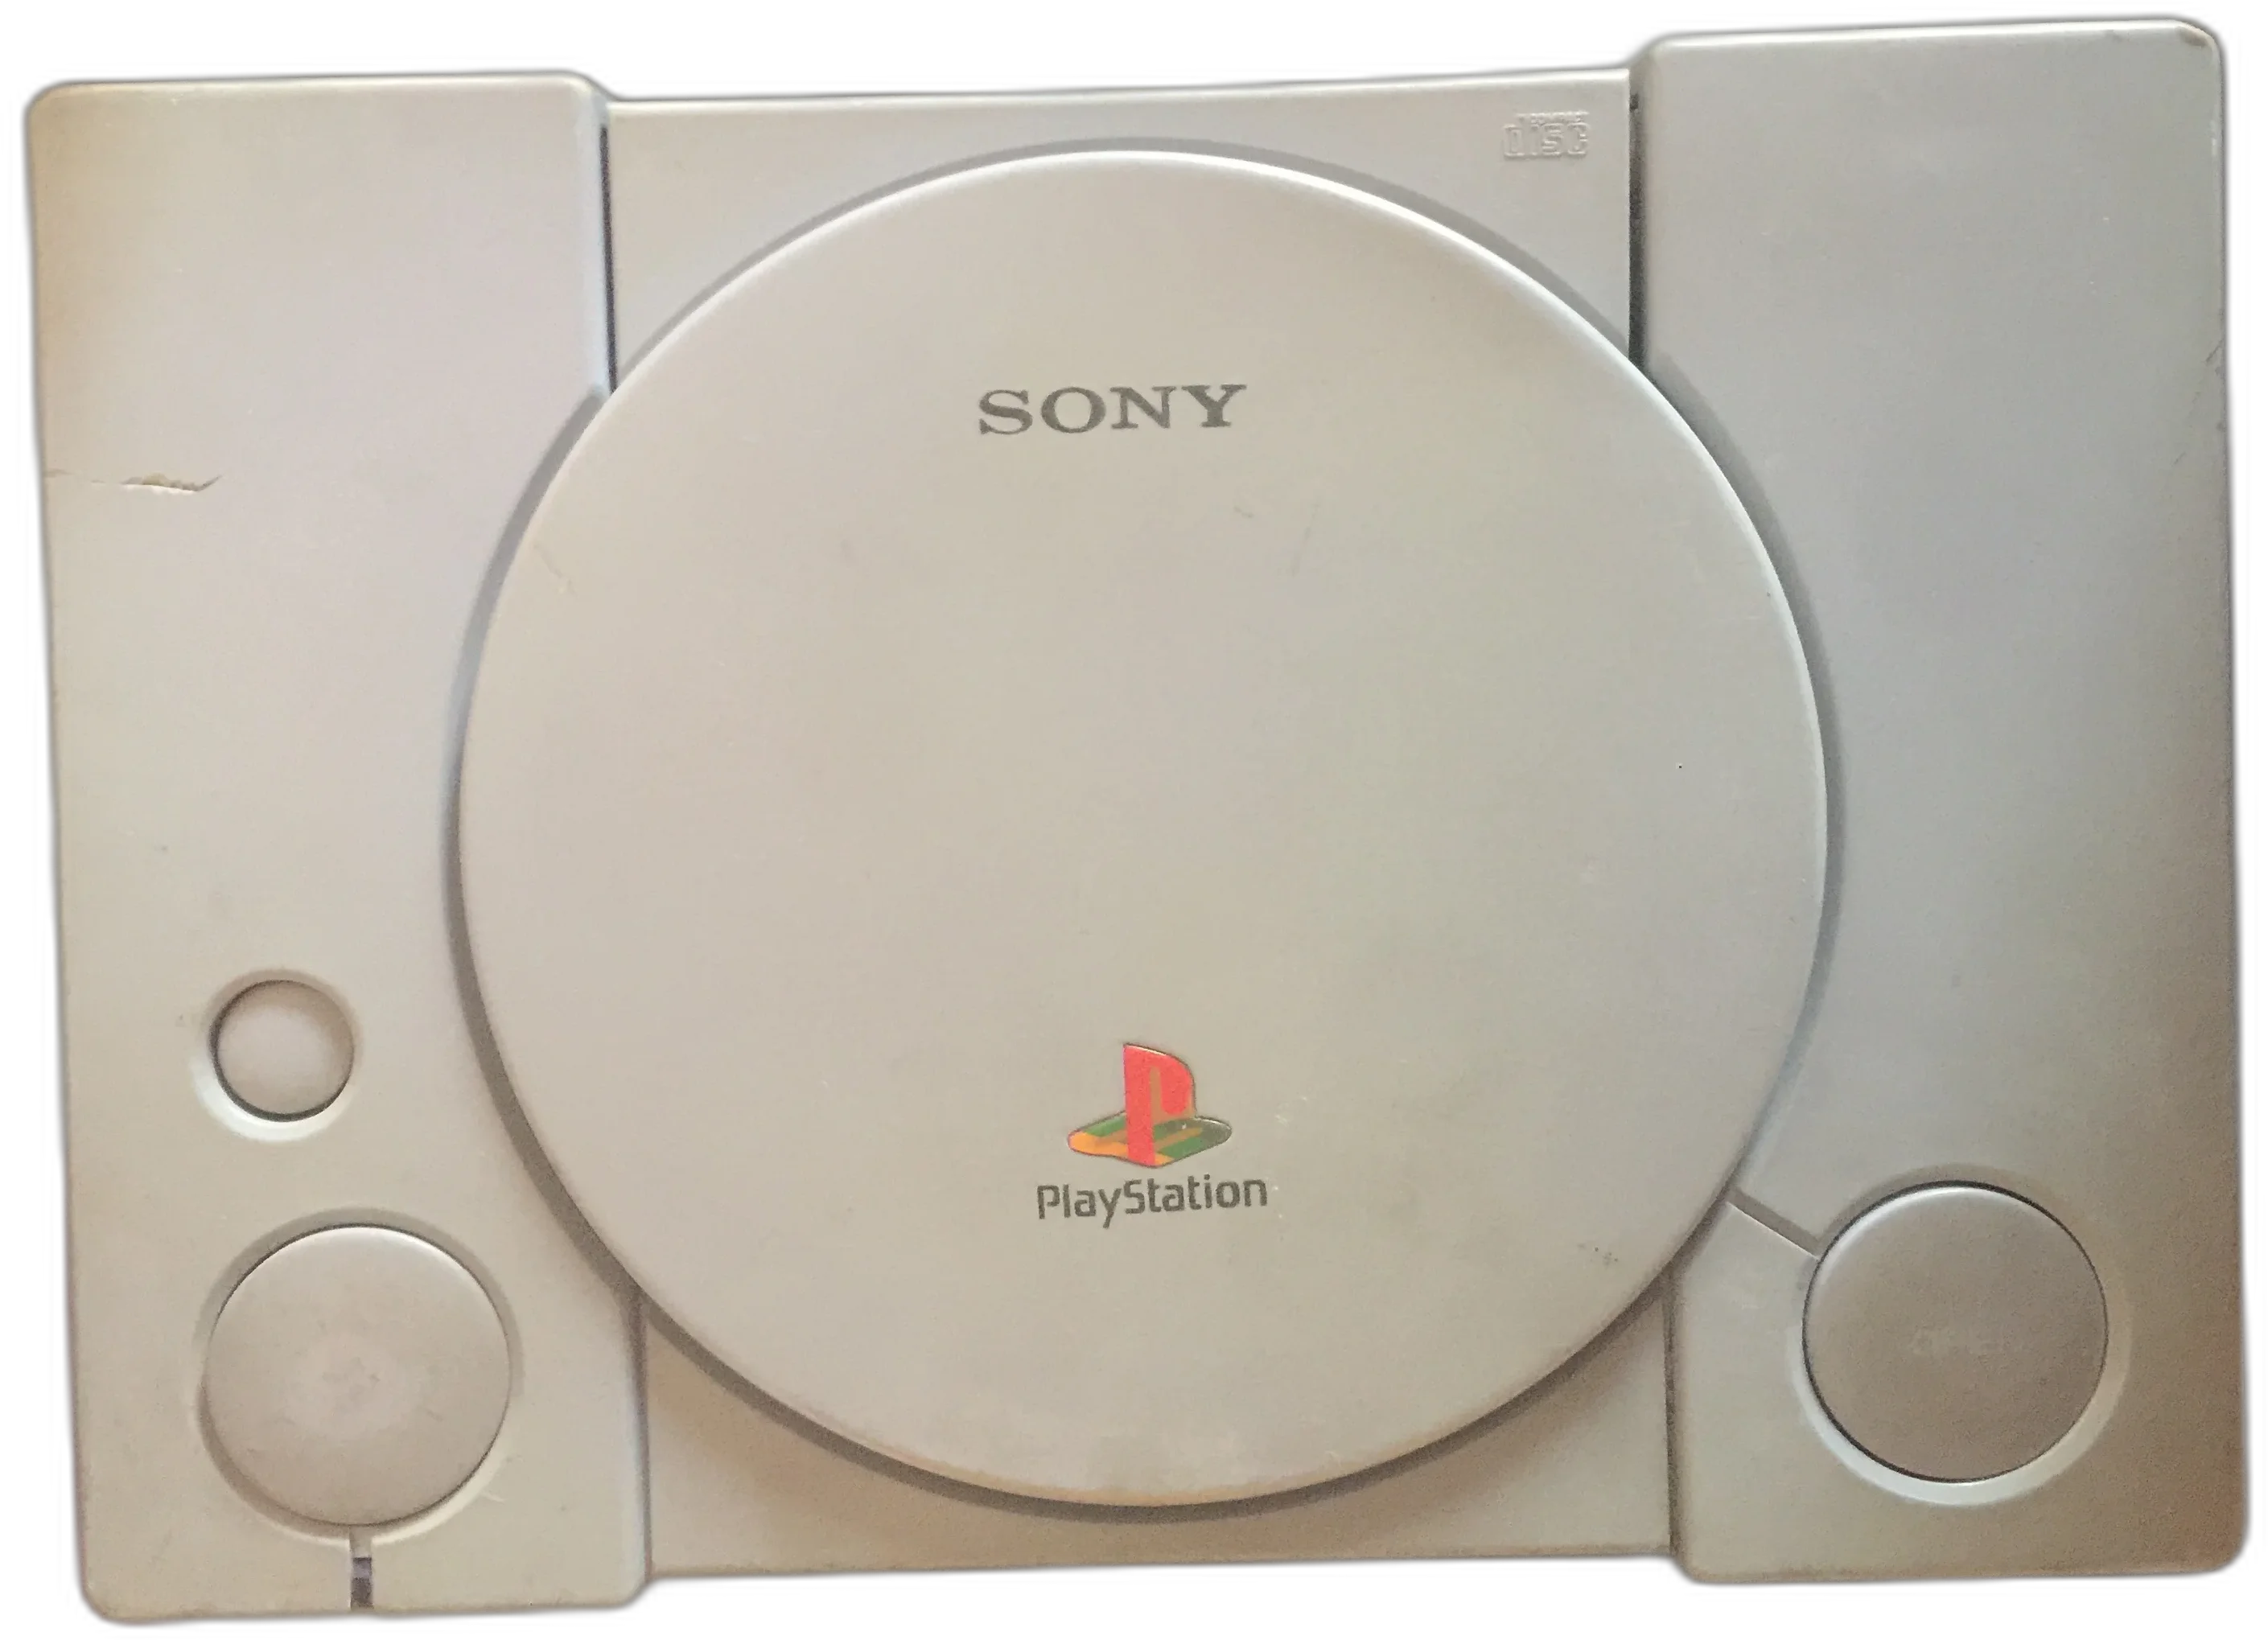  Sony PlayStation SCPH-9903 Console